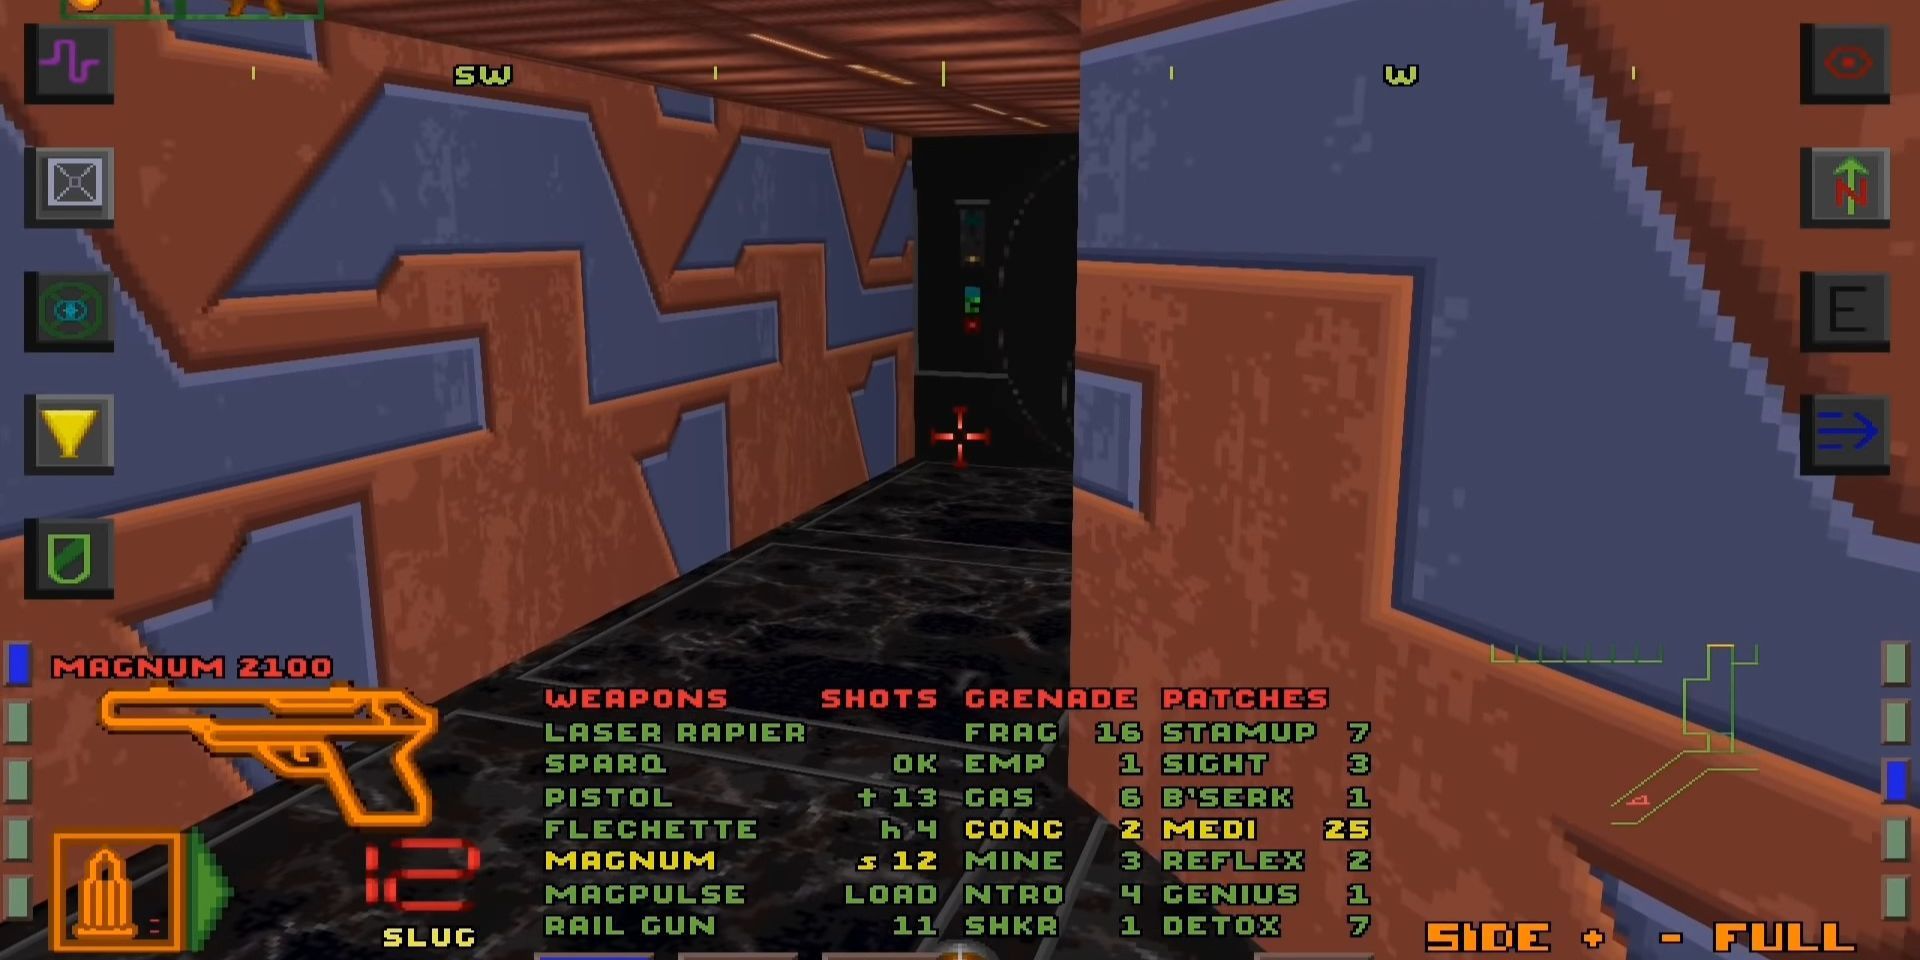 A screenshot from System Shock